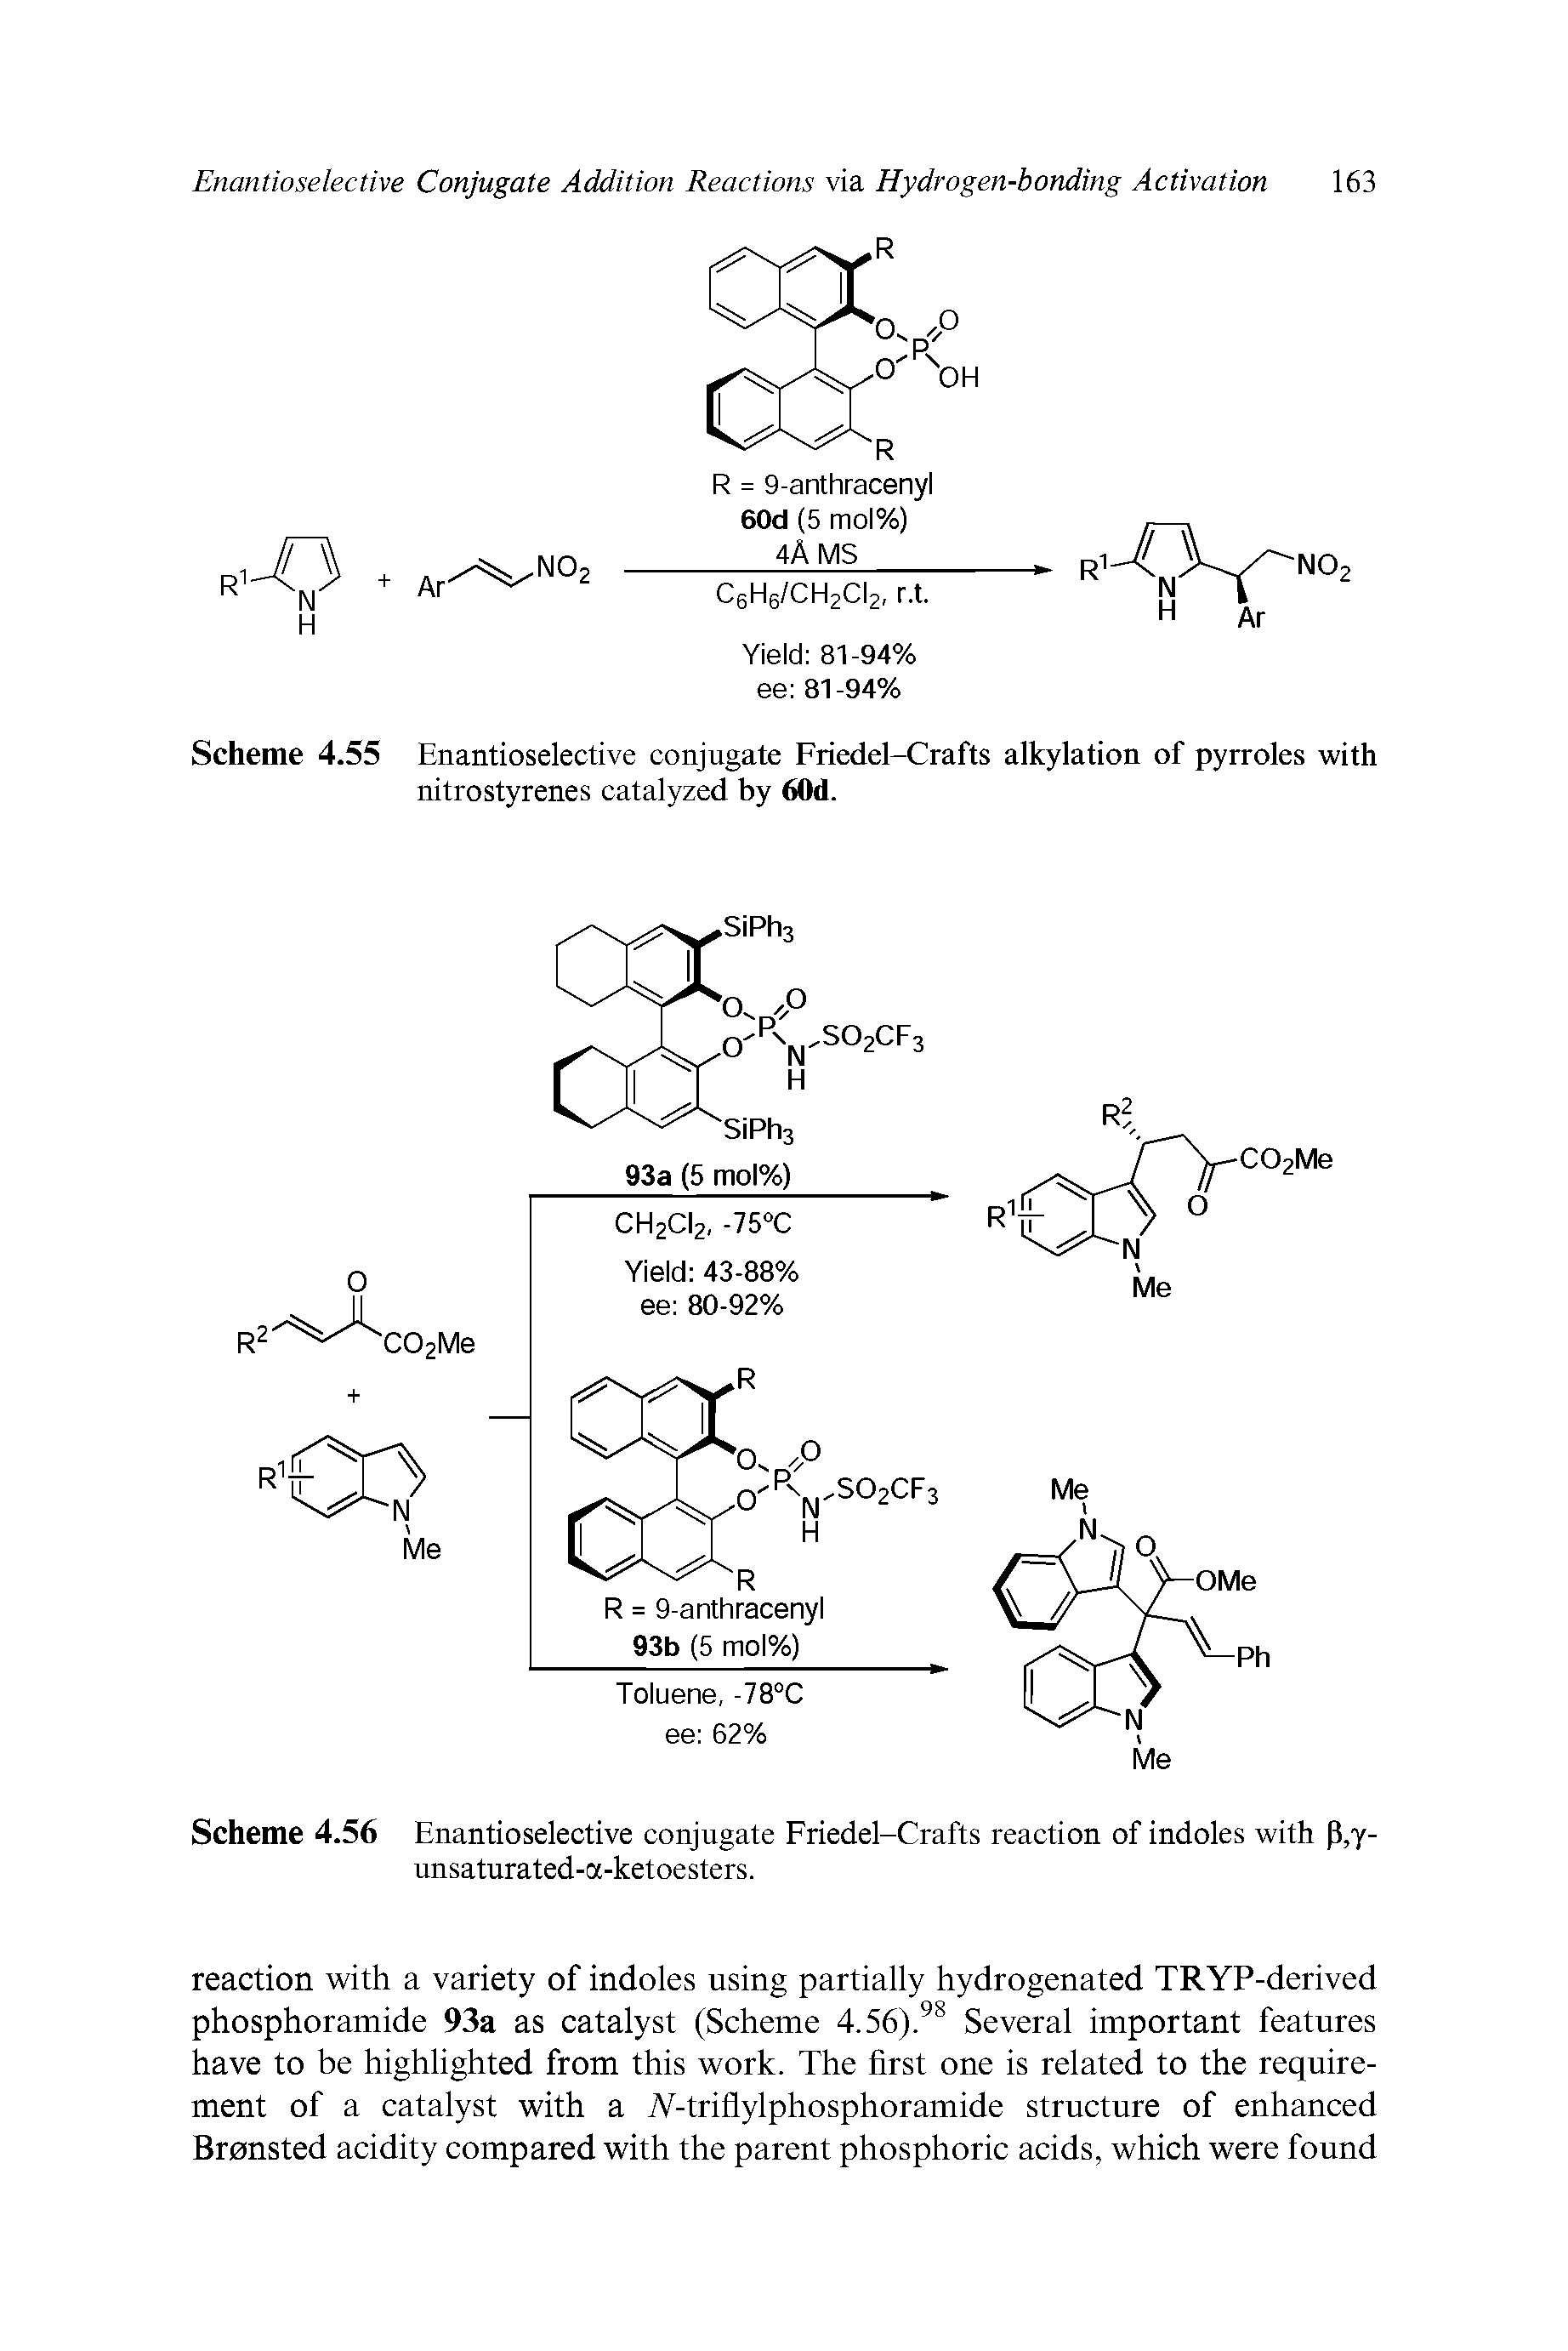 Scheme 4.56 Enantioselective conjugate Friedel-Crafts reaction of indoles with p,y-unsaturated-a-ketoesters.